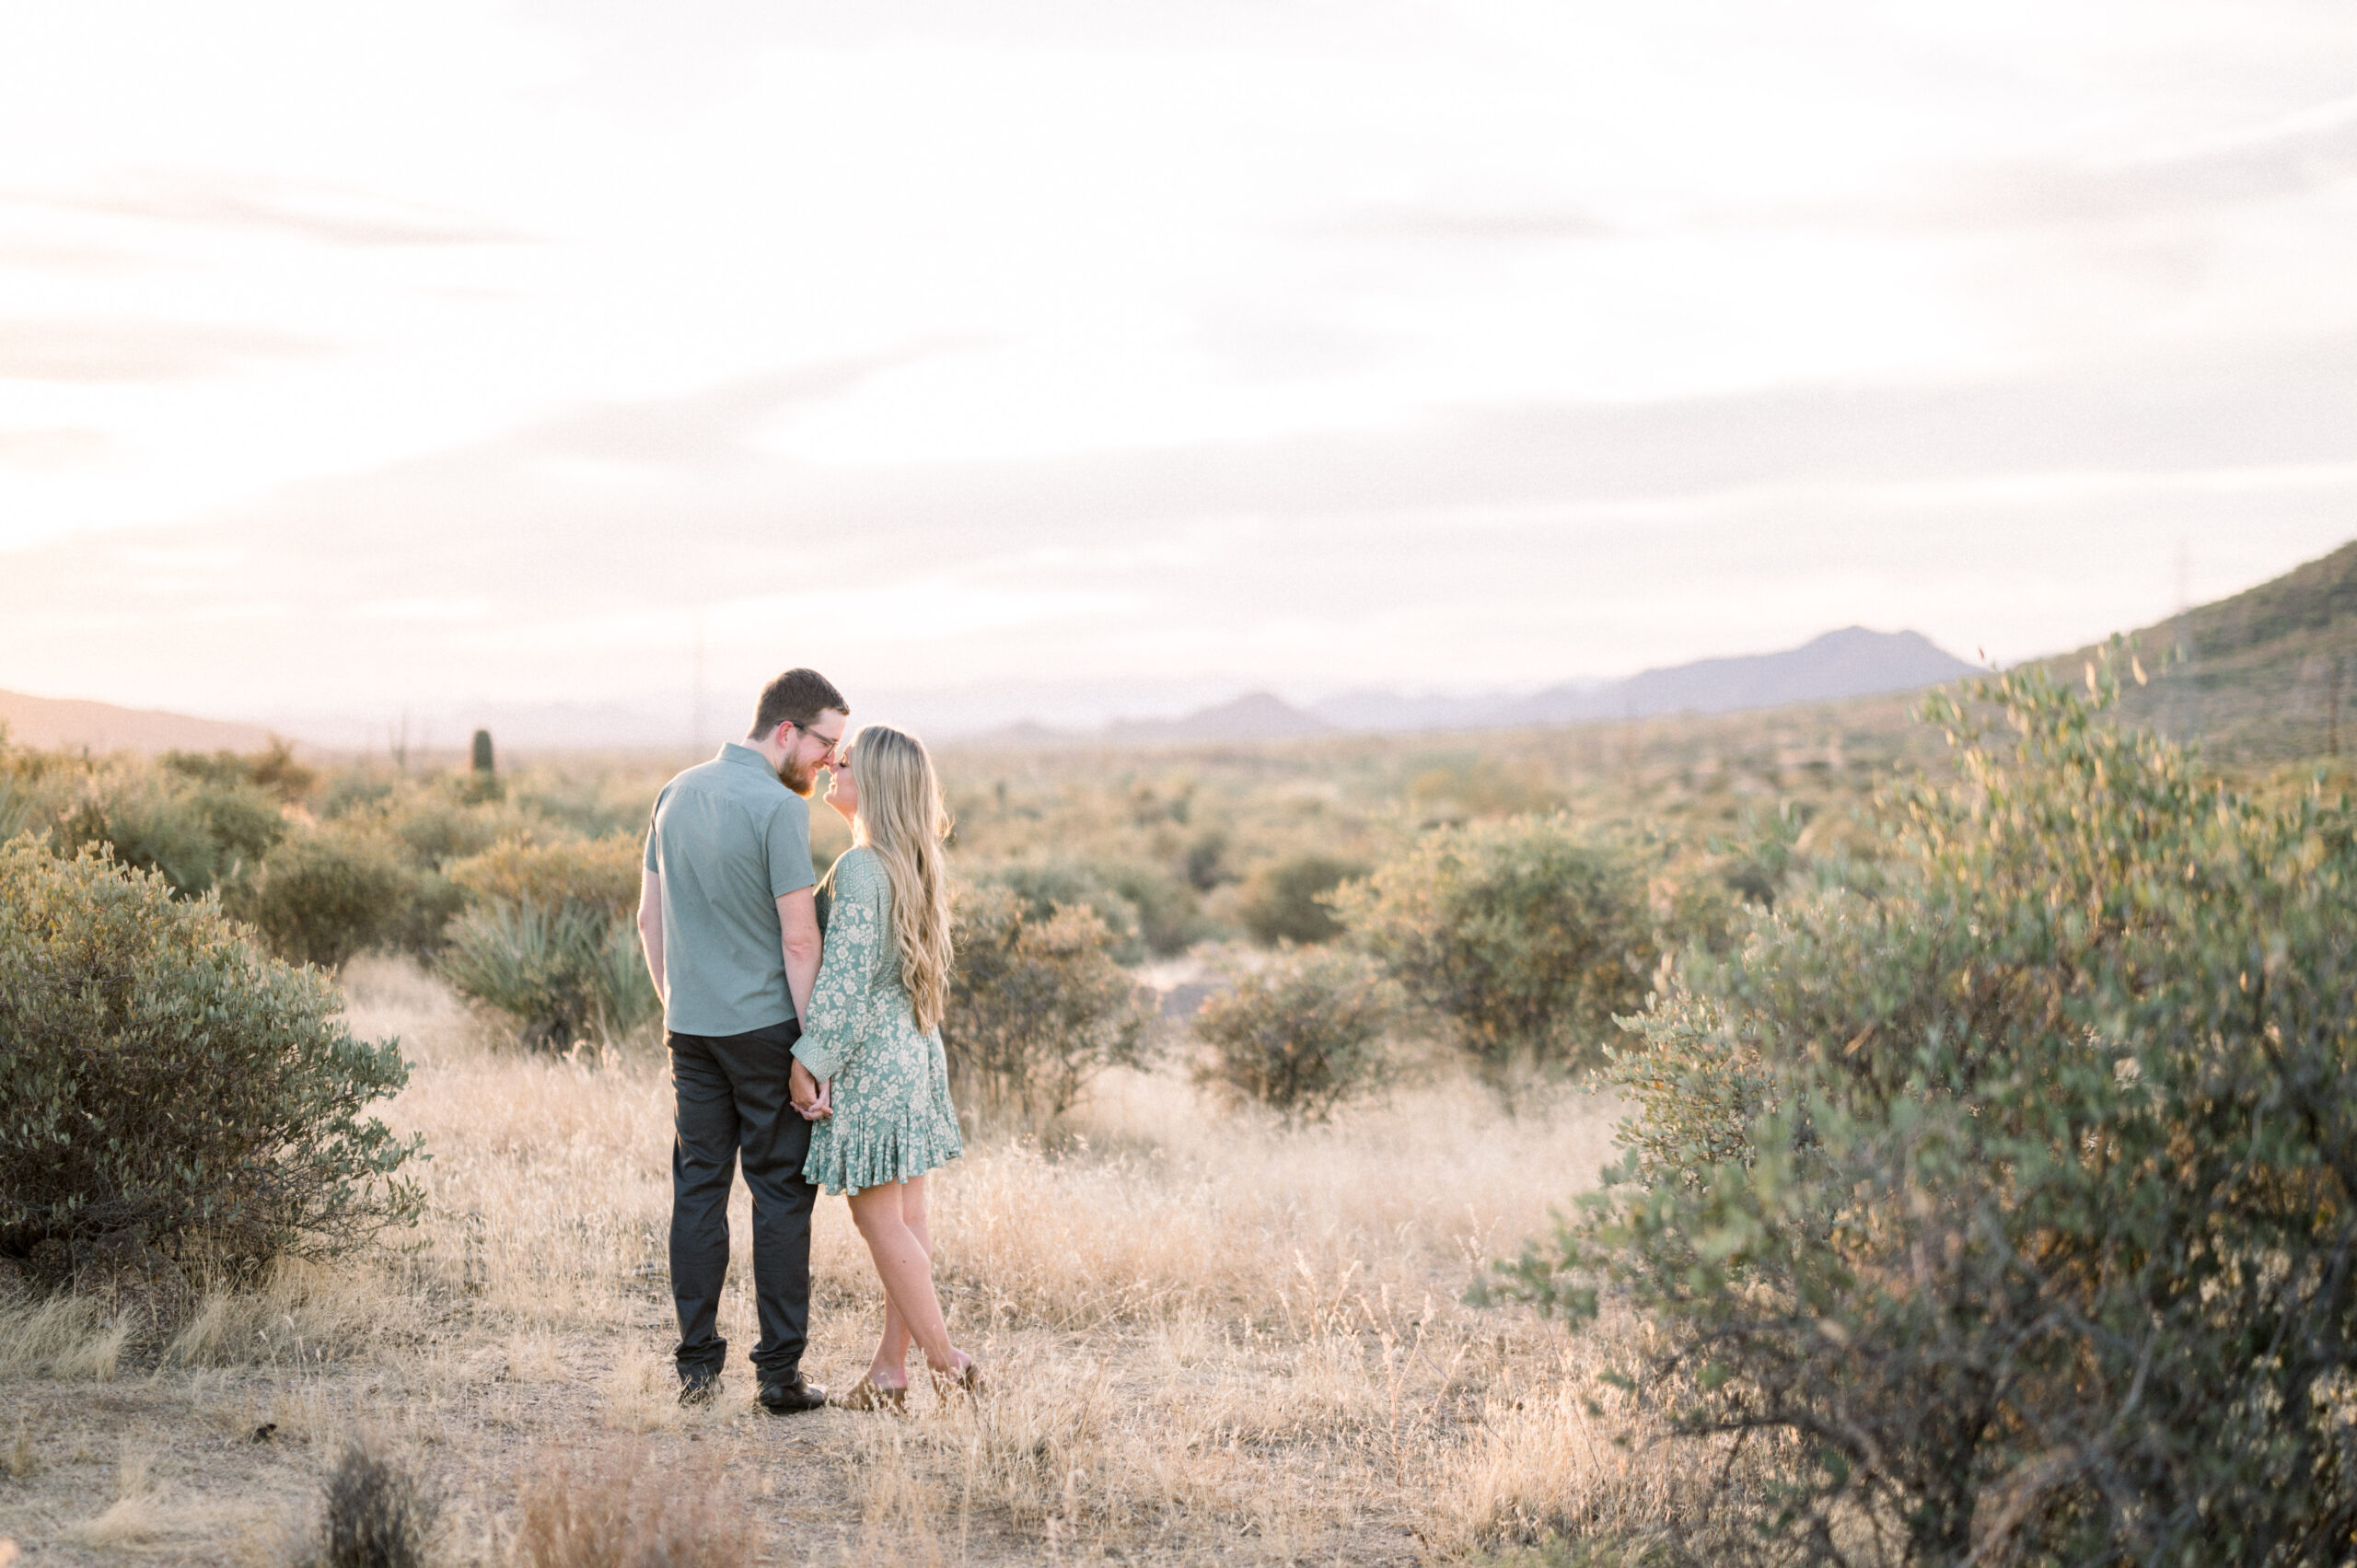 Scott and Danielles Scottsdale desert engagement session at Browns Ranch was a stunning one with the beautiful sunset. Can't wait for their wedding!